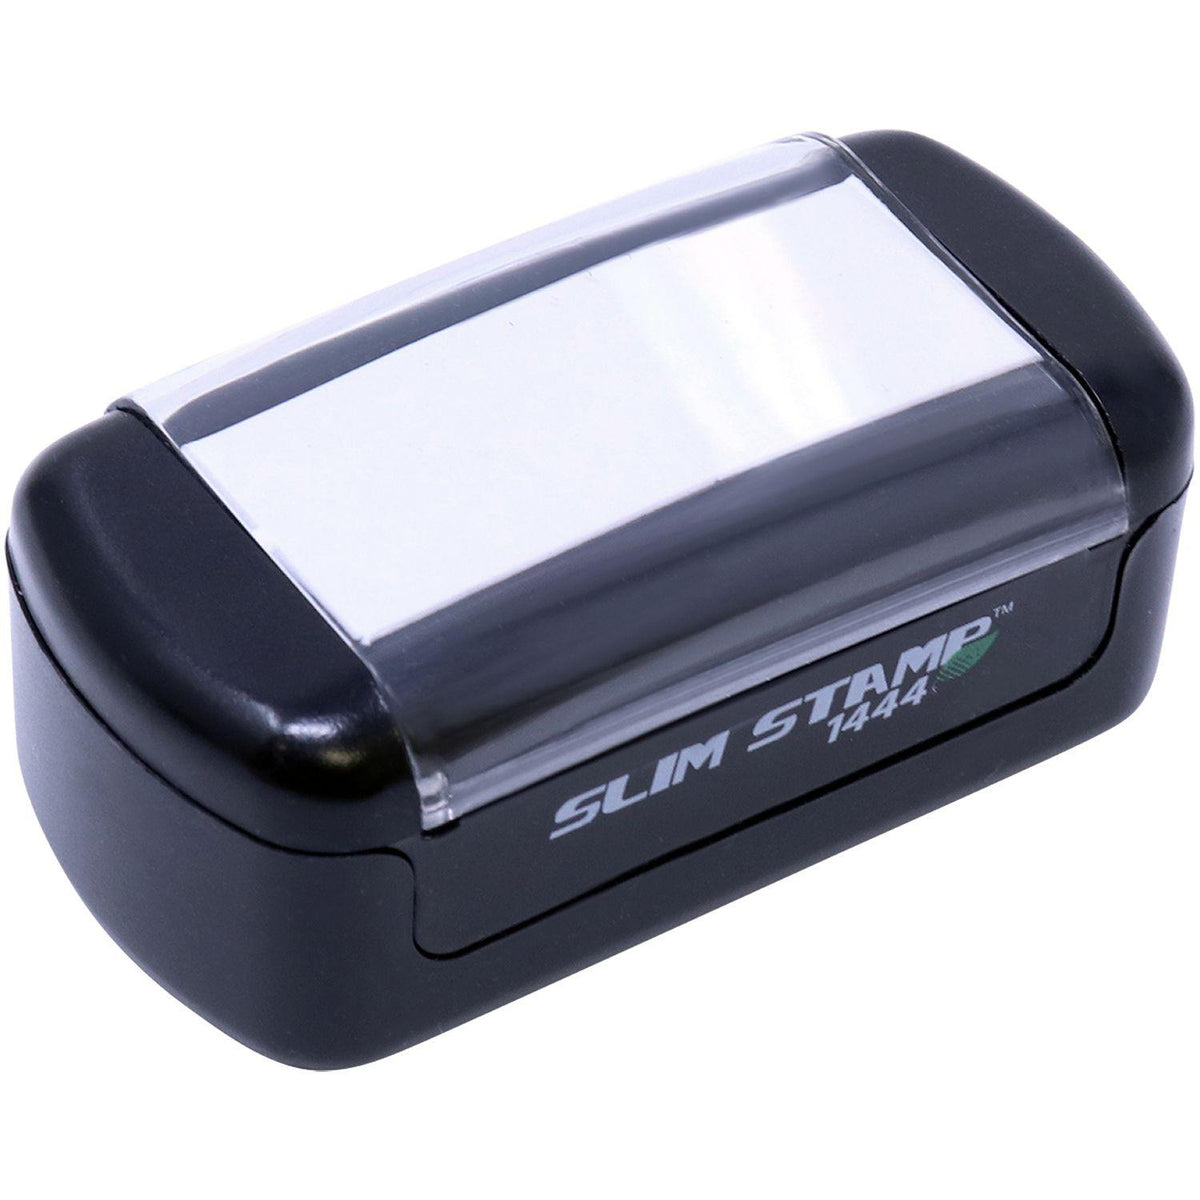 Slim Pre-Inked Bold Paid Stamp - Engineer Seal Stamps - Brand_Slim, Impression Size_Small, Stamp Type_Pre-Inked Stamp, Type of Use_Accounting, Type of Use_Finance, Type of Use_Office